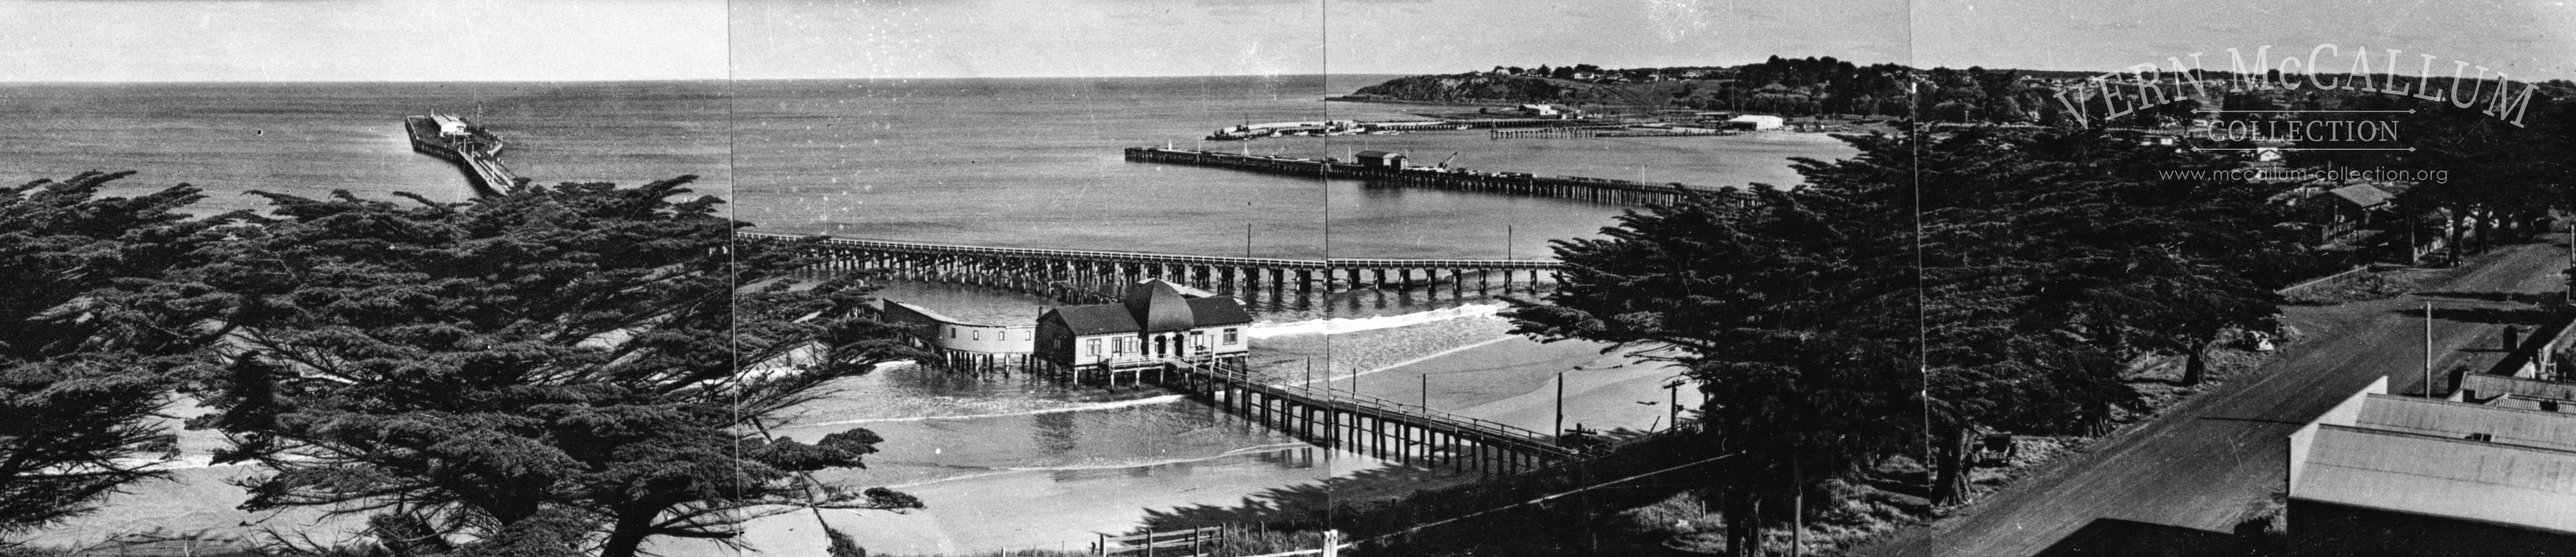 A view of the bay showing the third portland baths.